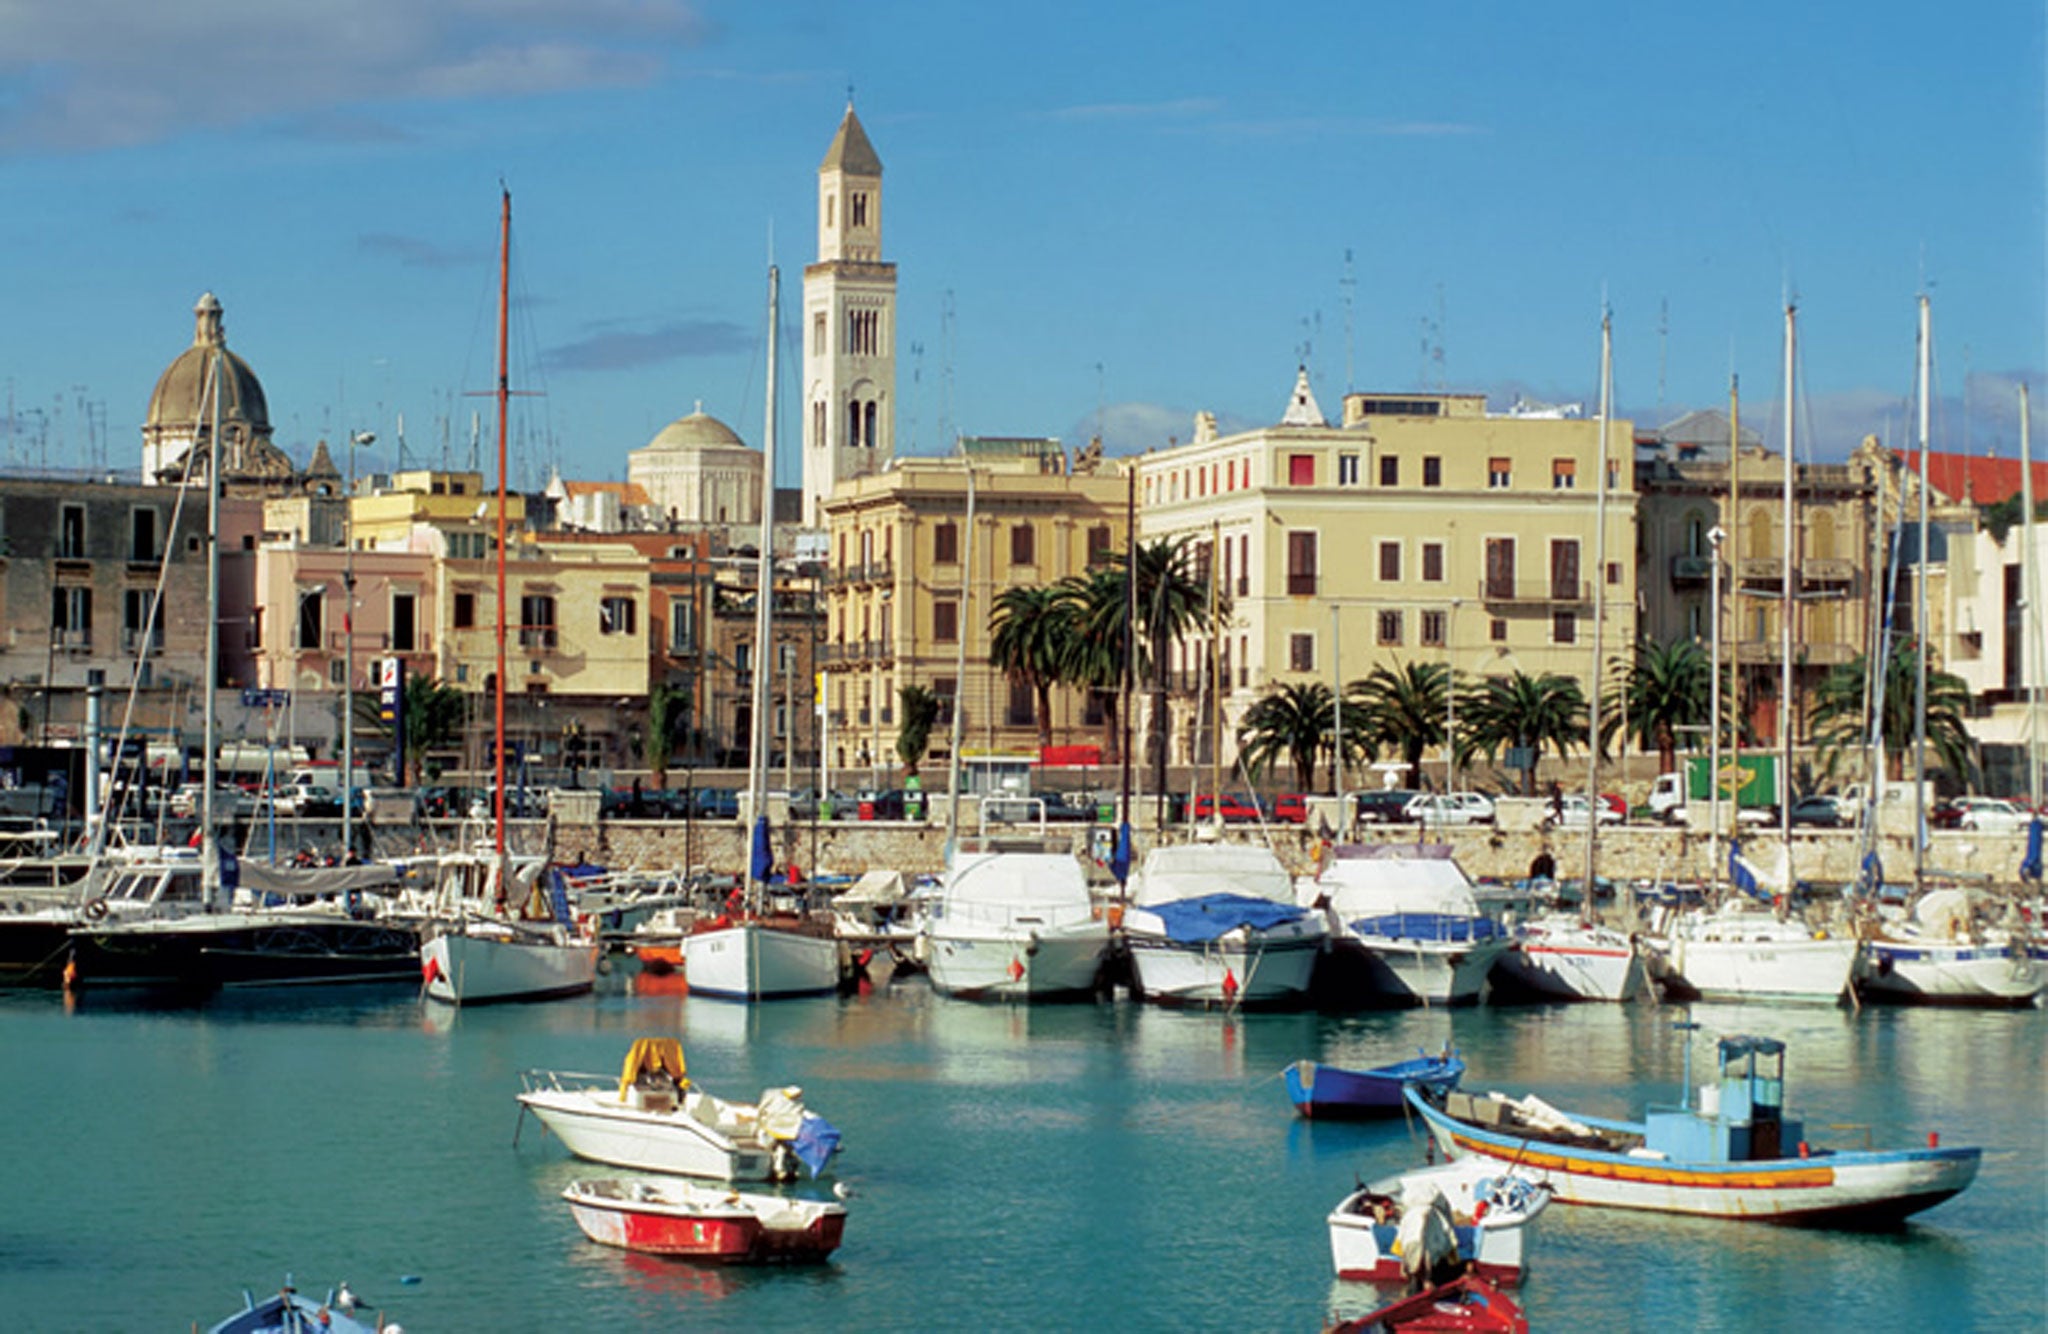 Haunted by guilt: historic centre of Bari in Puglia, Italy